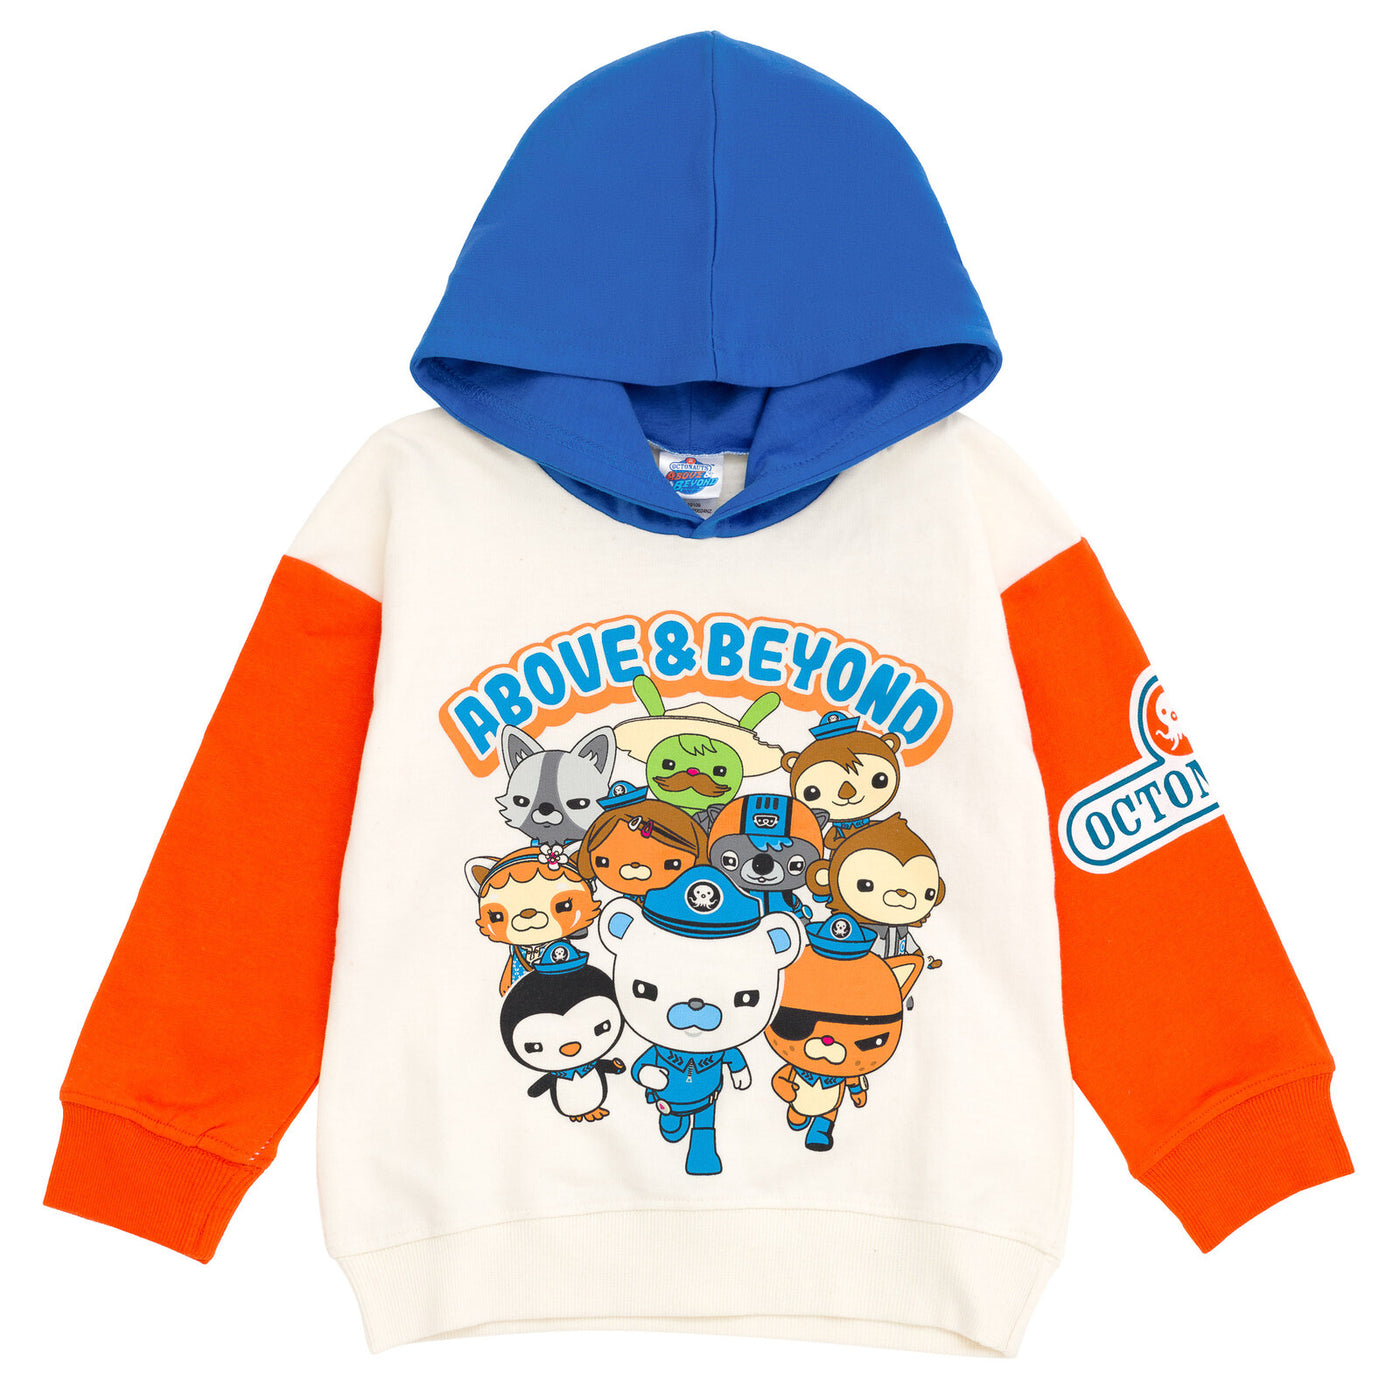 OCTONAUTS Fleece Pullover Hoodie and Jogger Pants Outfit Set